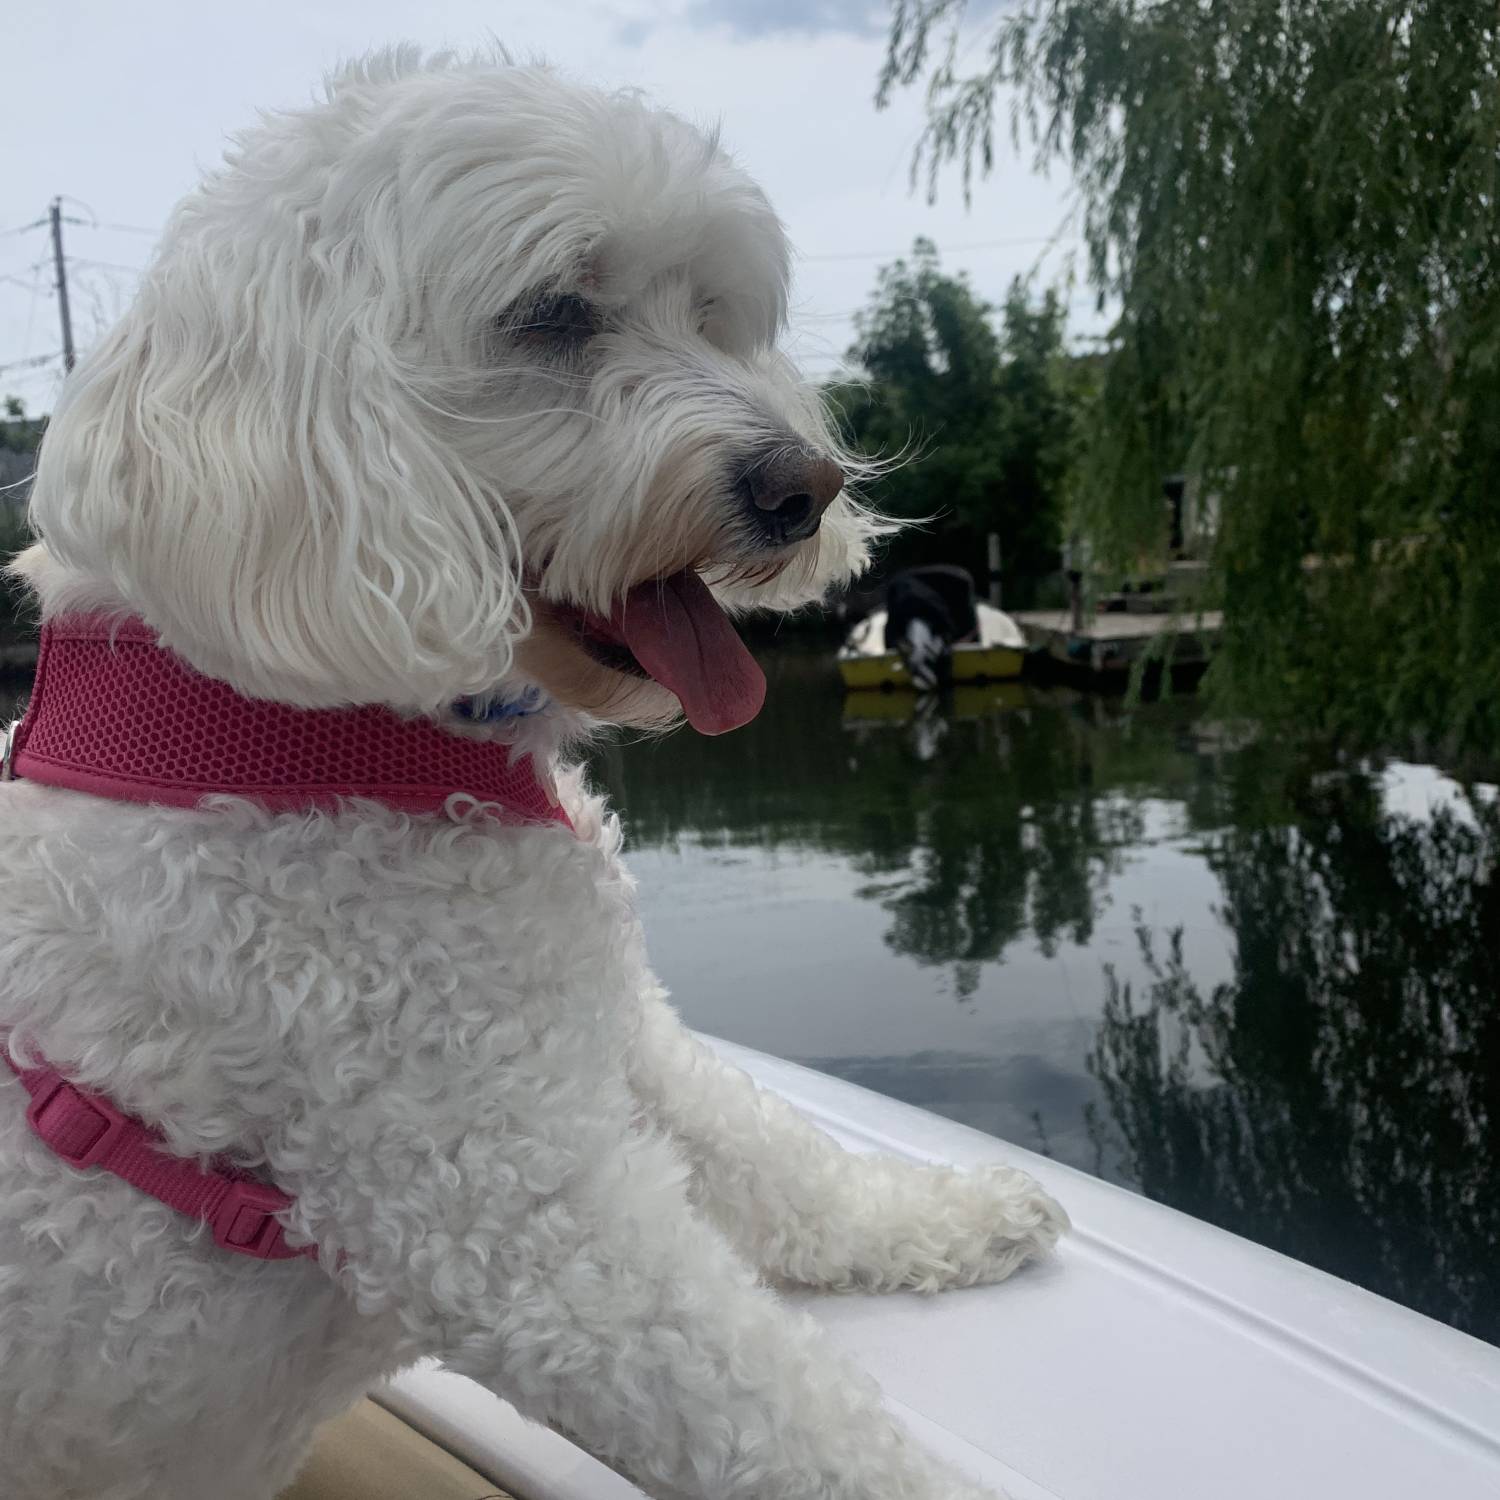 Bella likes to ”engage” with ducks and swans as we leave our channel.